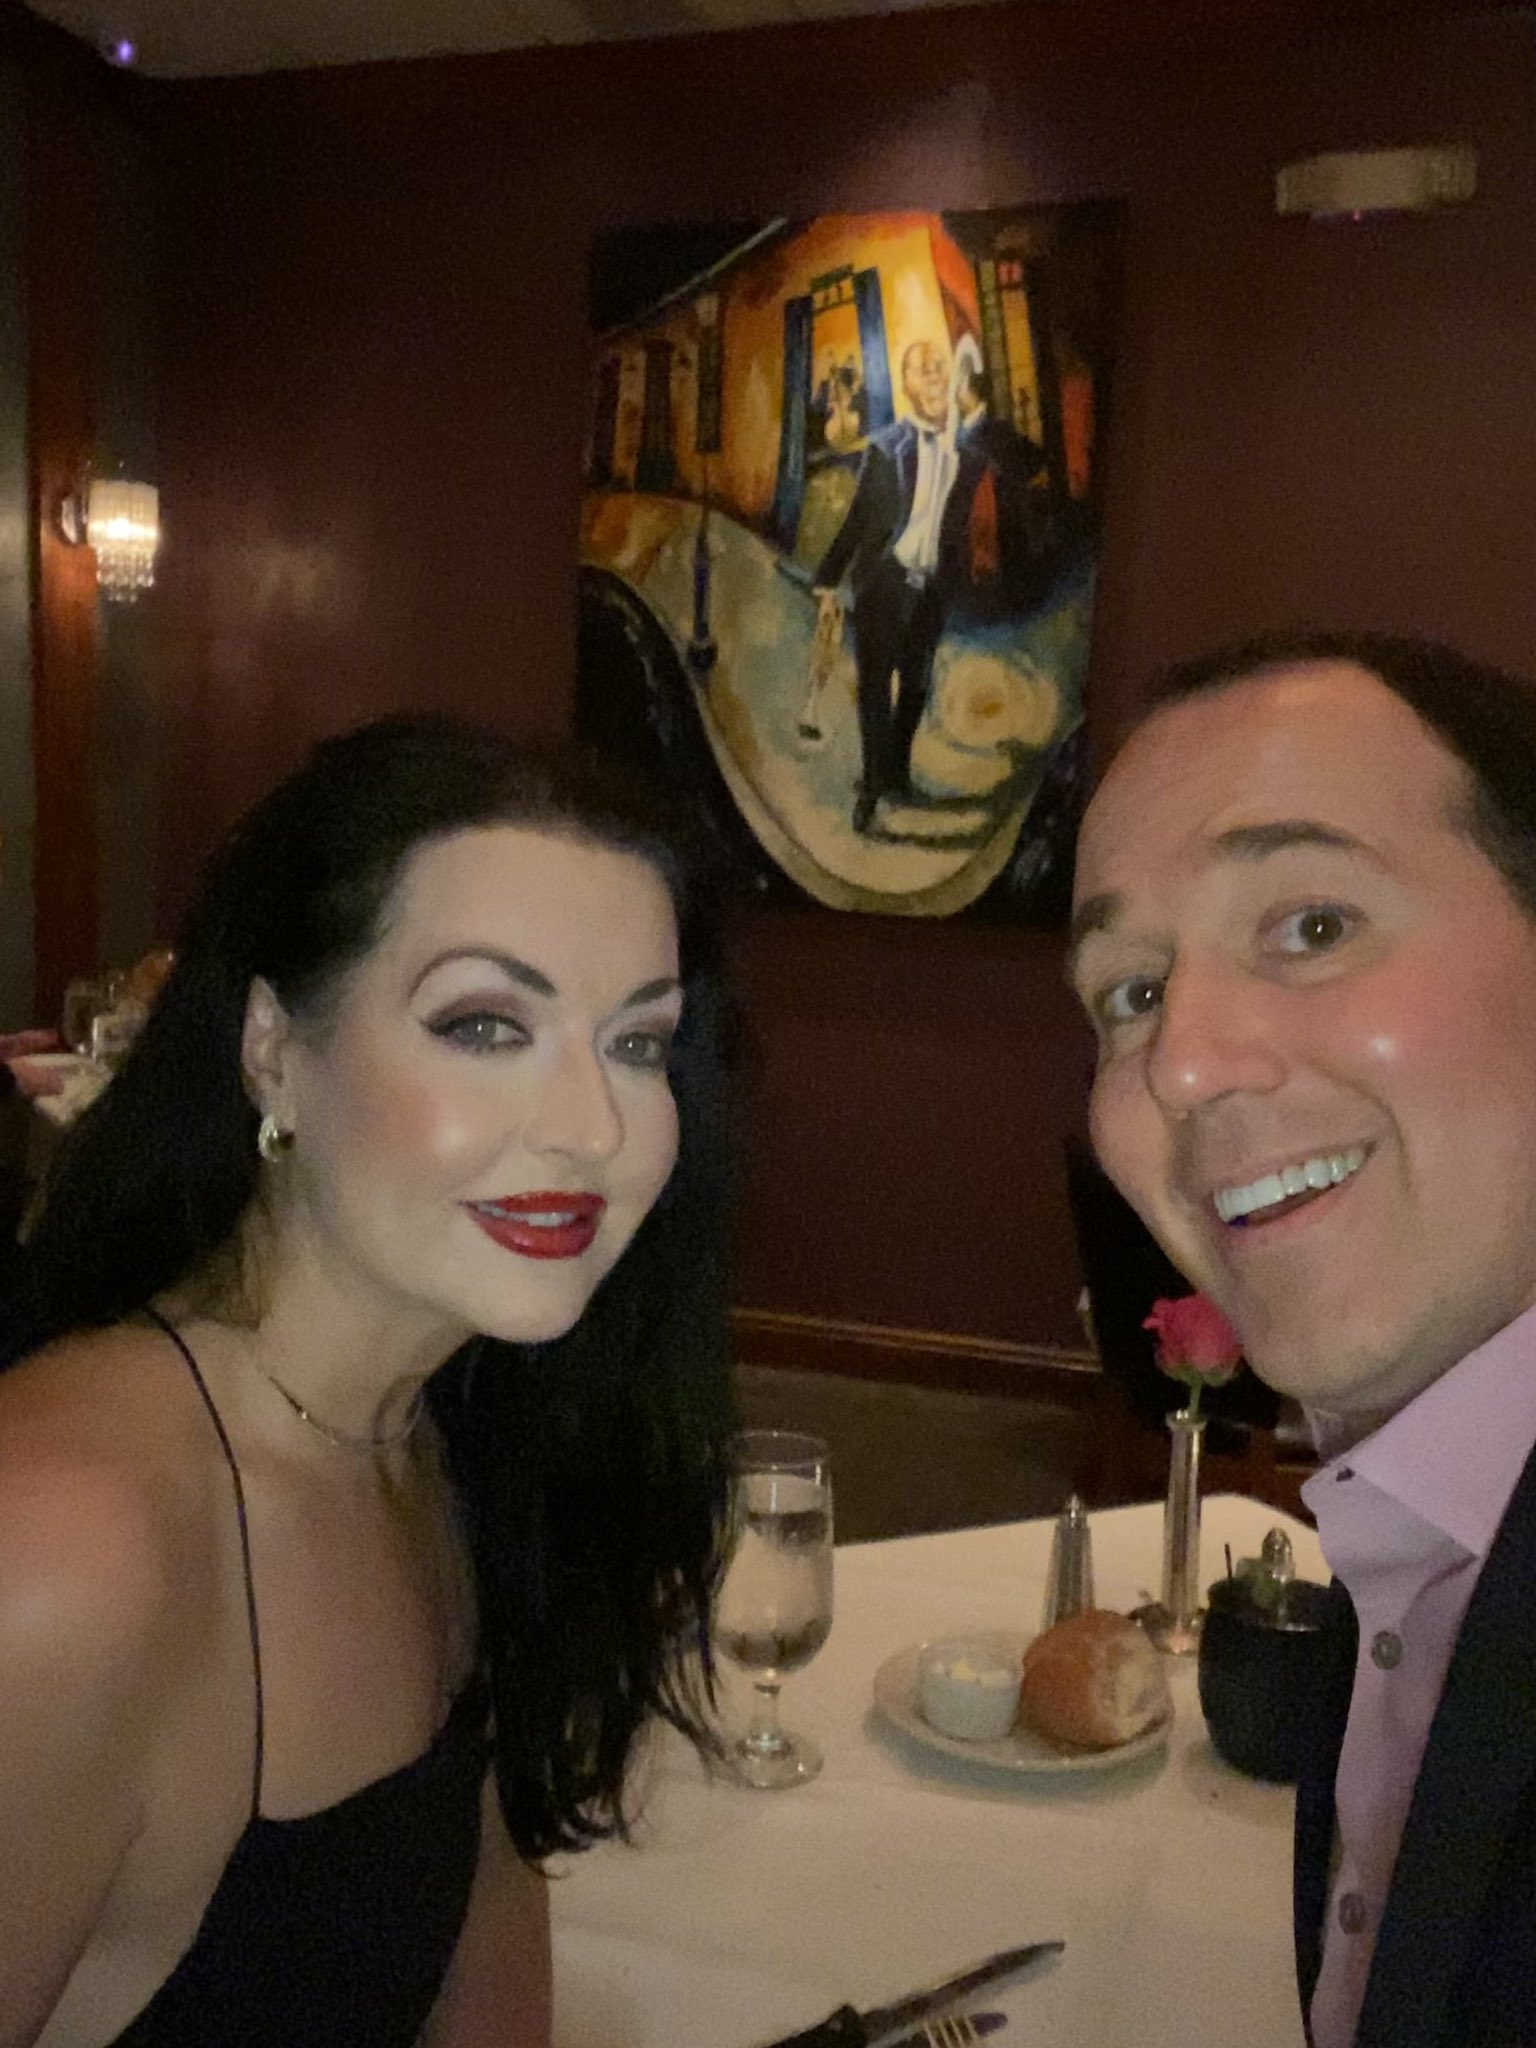 Raymond Arroyo on Twitter: "Happy Anniversary my best friend, sparring partner and love of my life. Rebecca, here's to the next 27. Love you. https://t.co/haYT1bwYOD" / Twitter